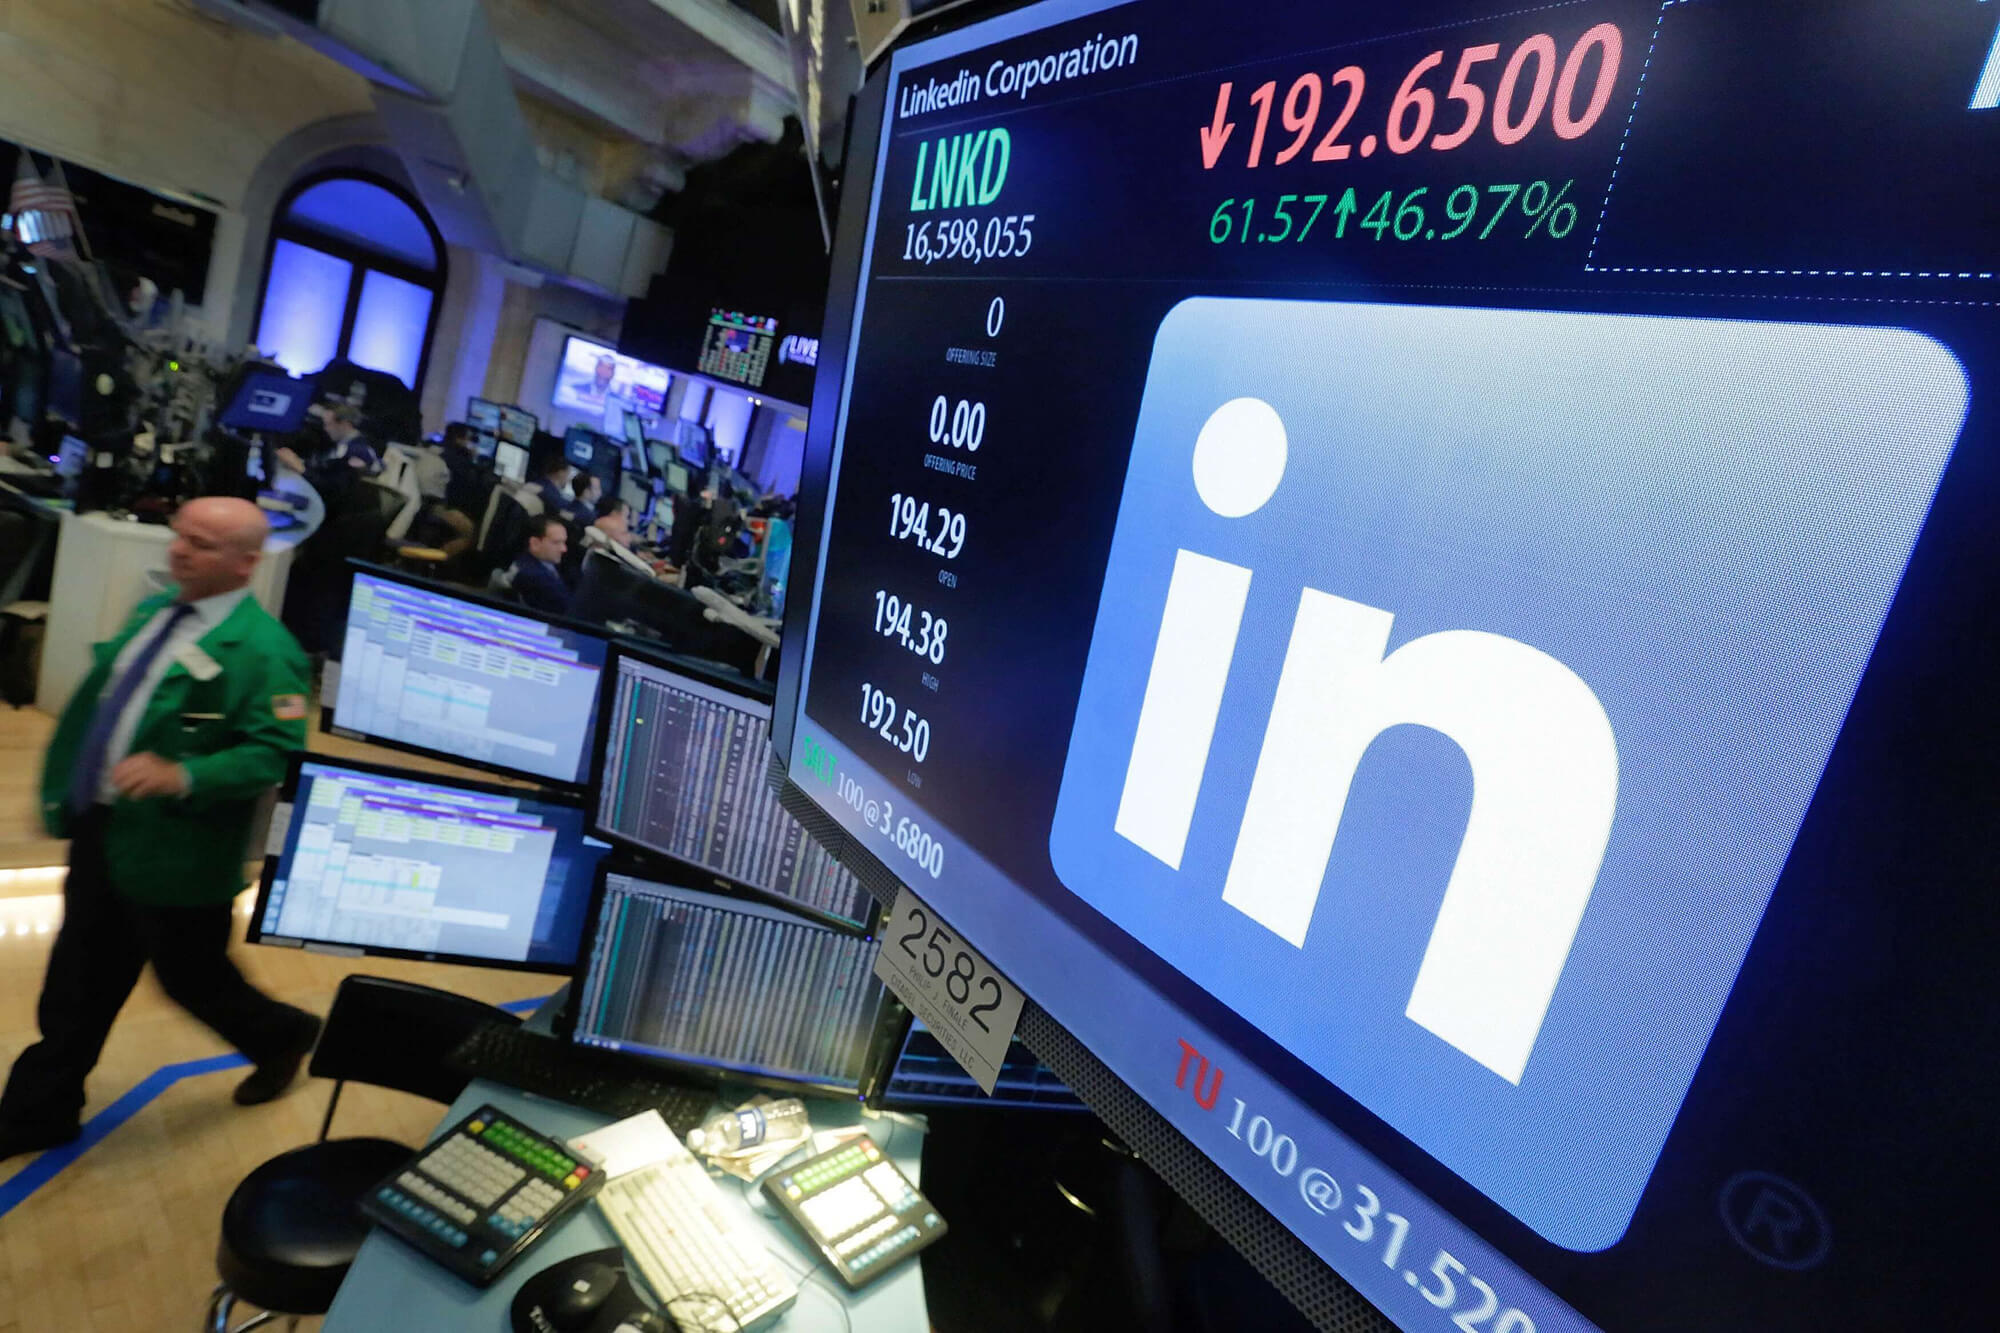 LinkedIn logo appears on a screen at the post where it trades on the floor of the New York Stock Exchange